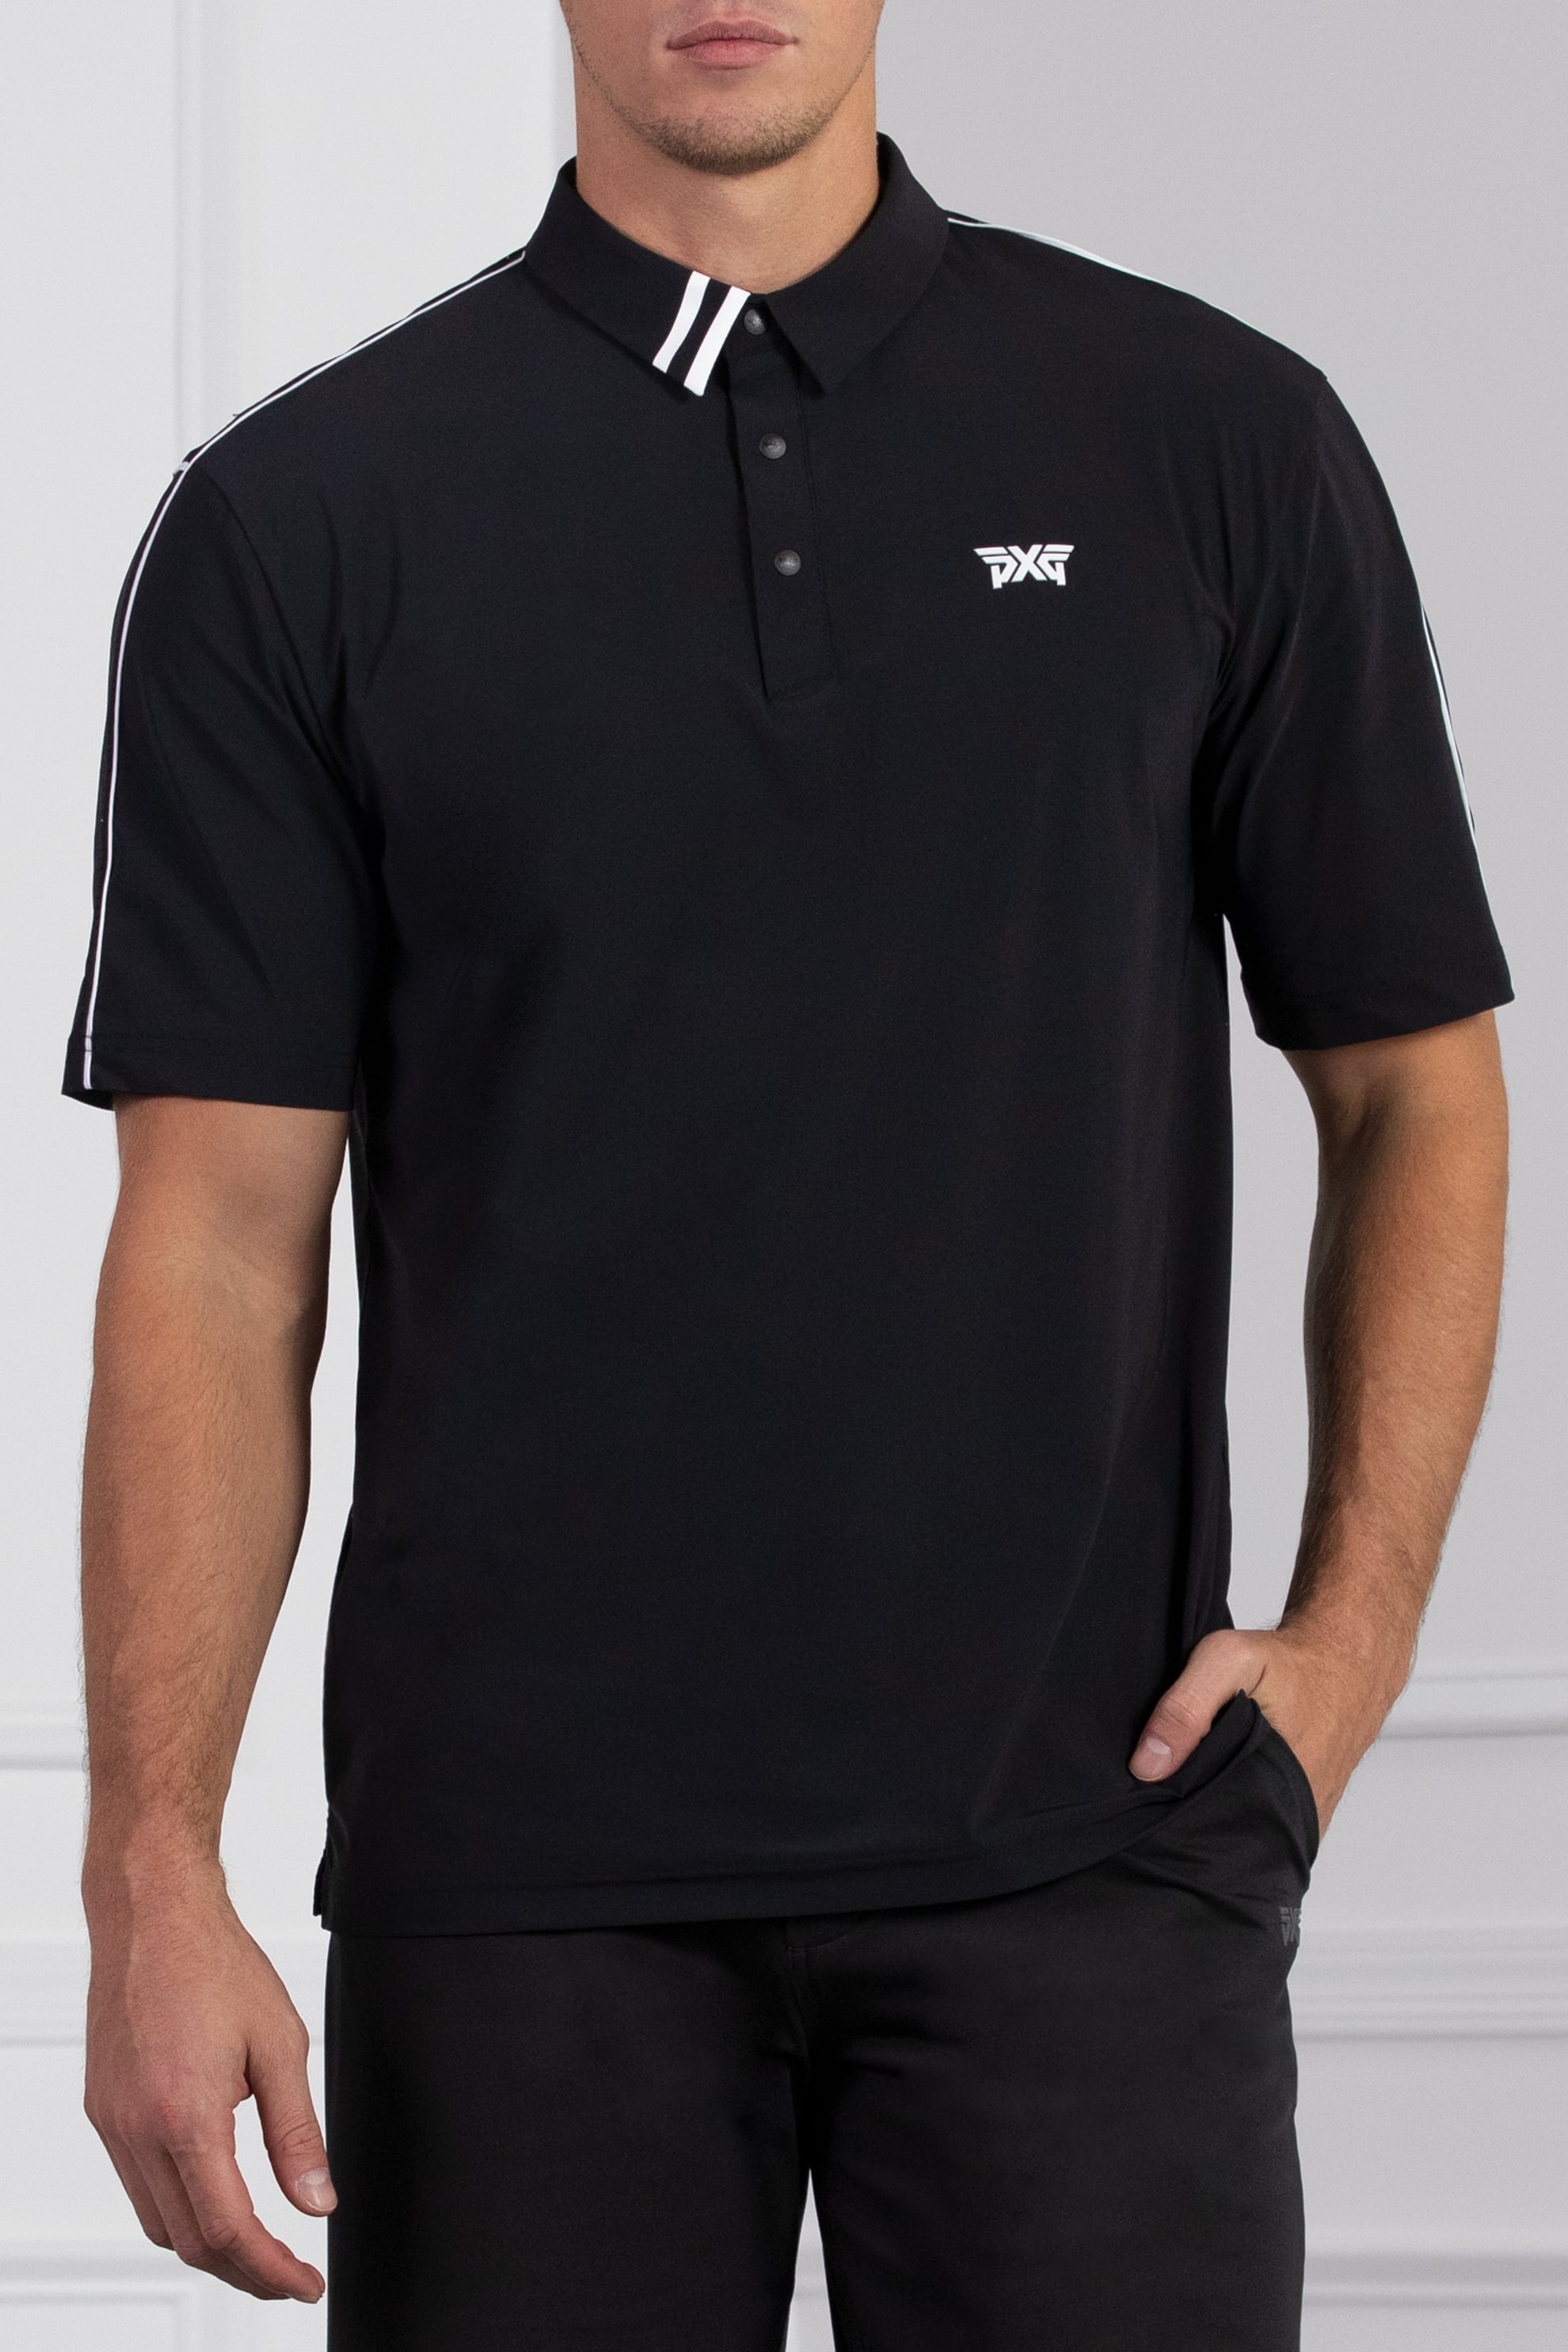 Comfort Fit Fineline Polo Gear, Quality PXG Apparel, Shop Highest Golf and at Golf the Accessories Clubs 